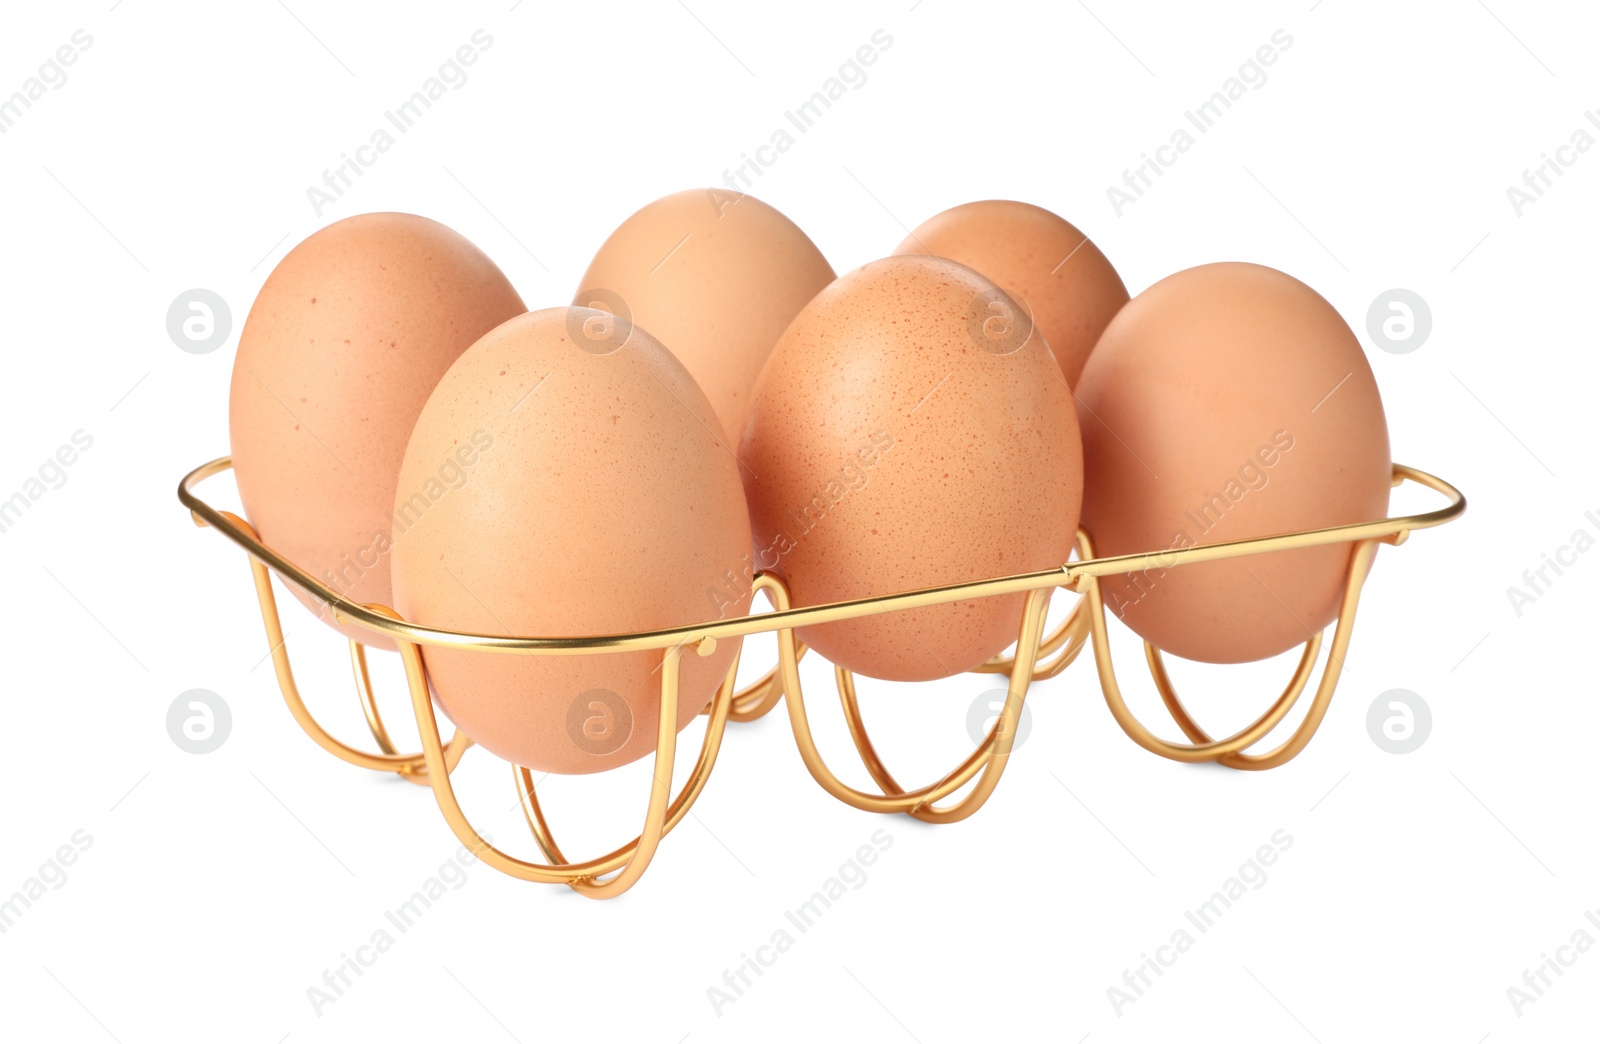 Photo of Golden metal egg tray on white background